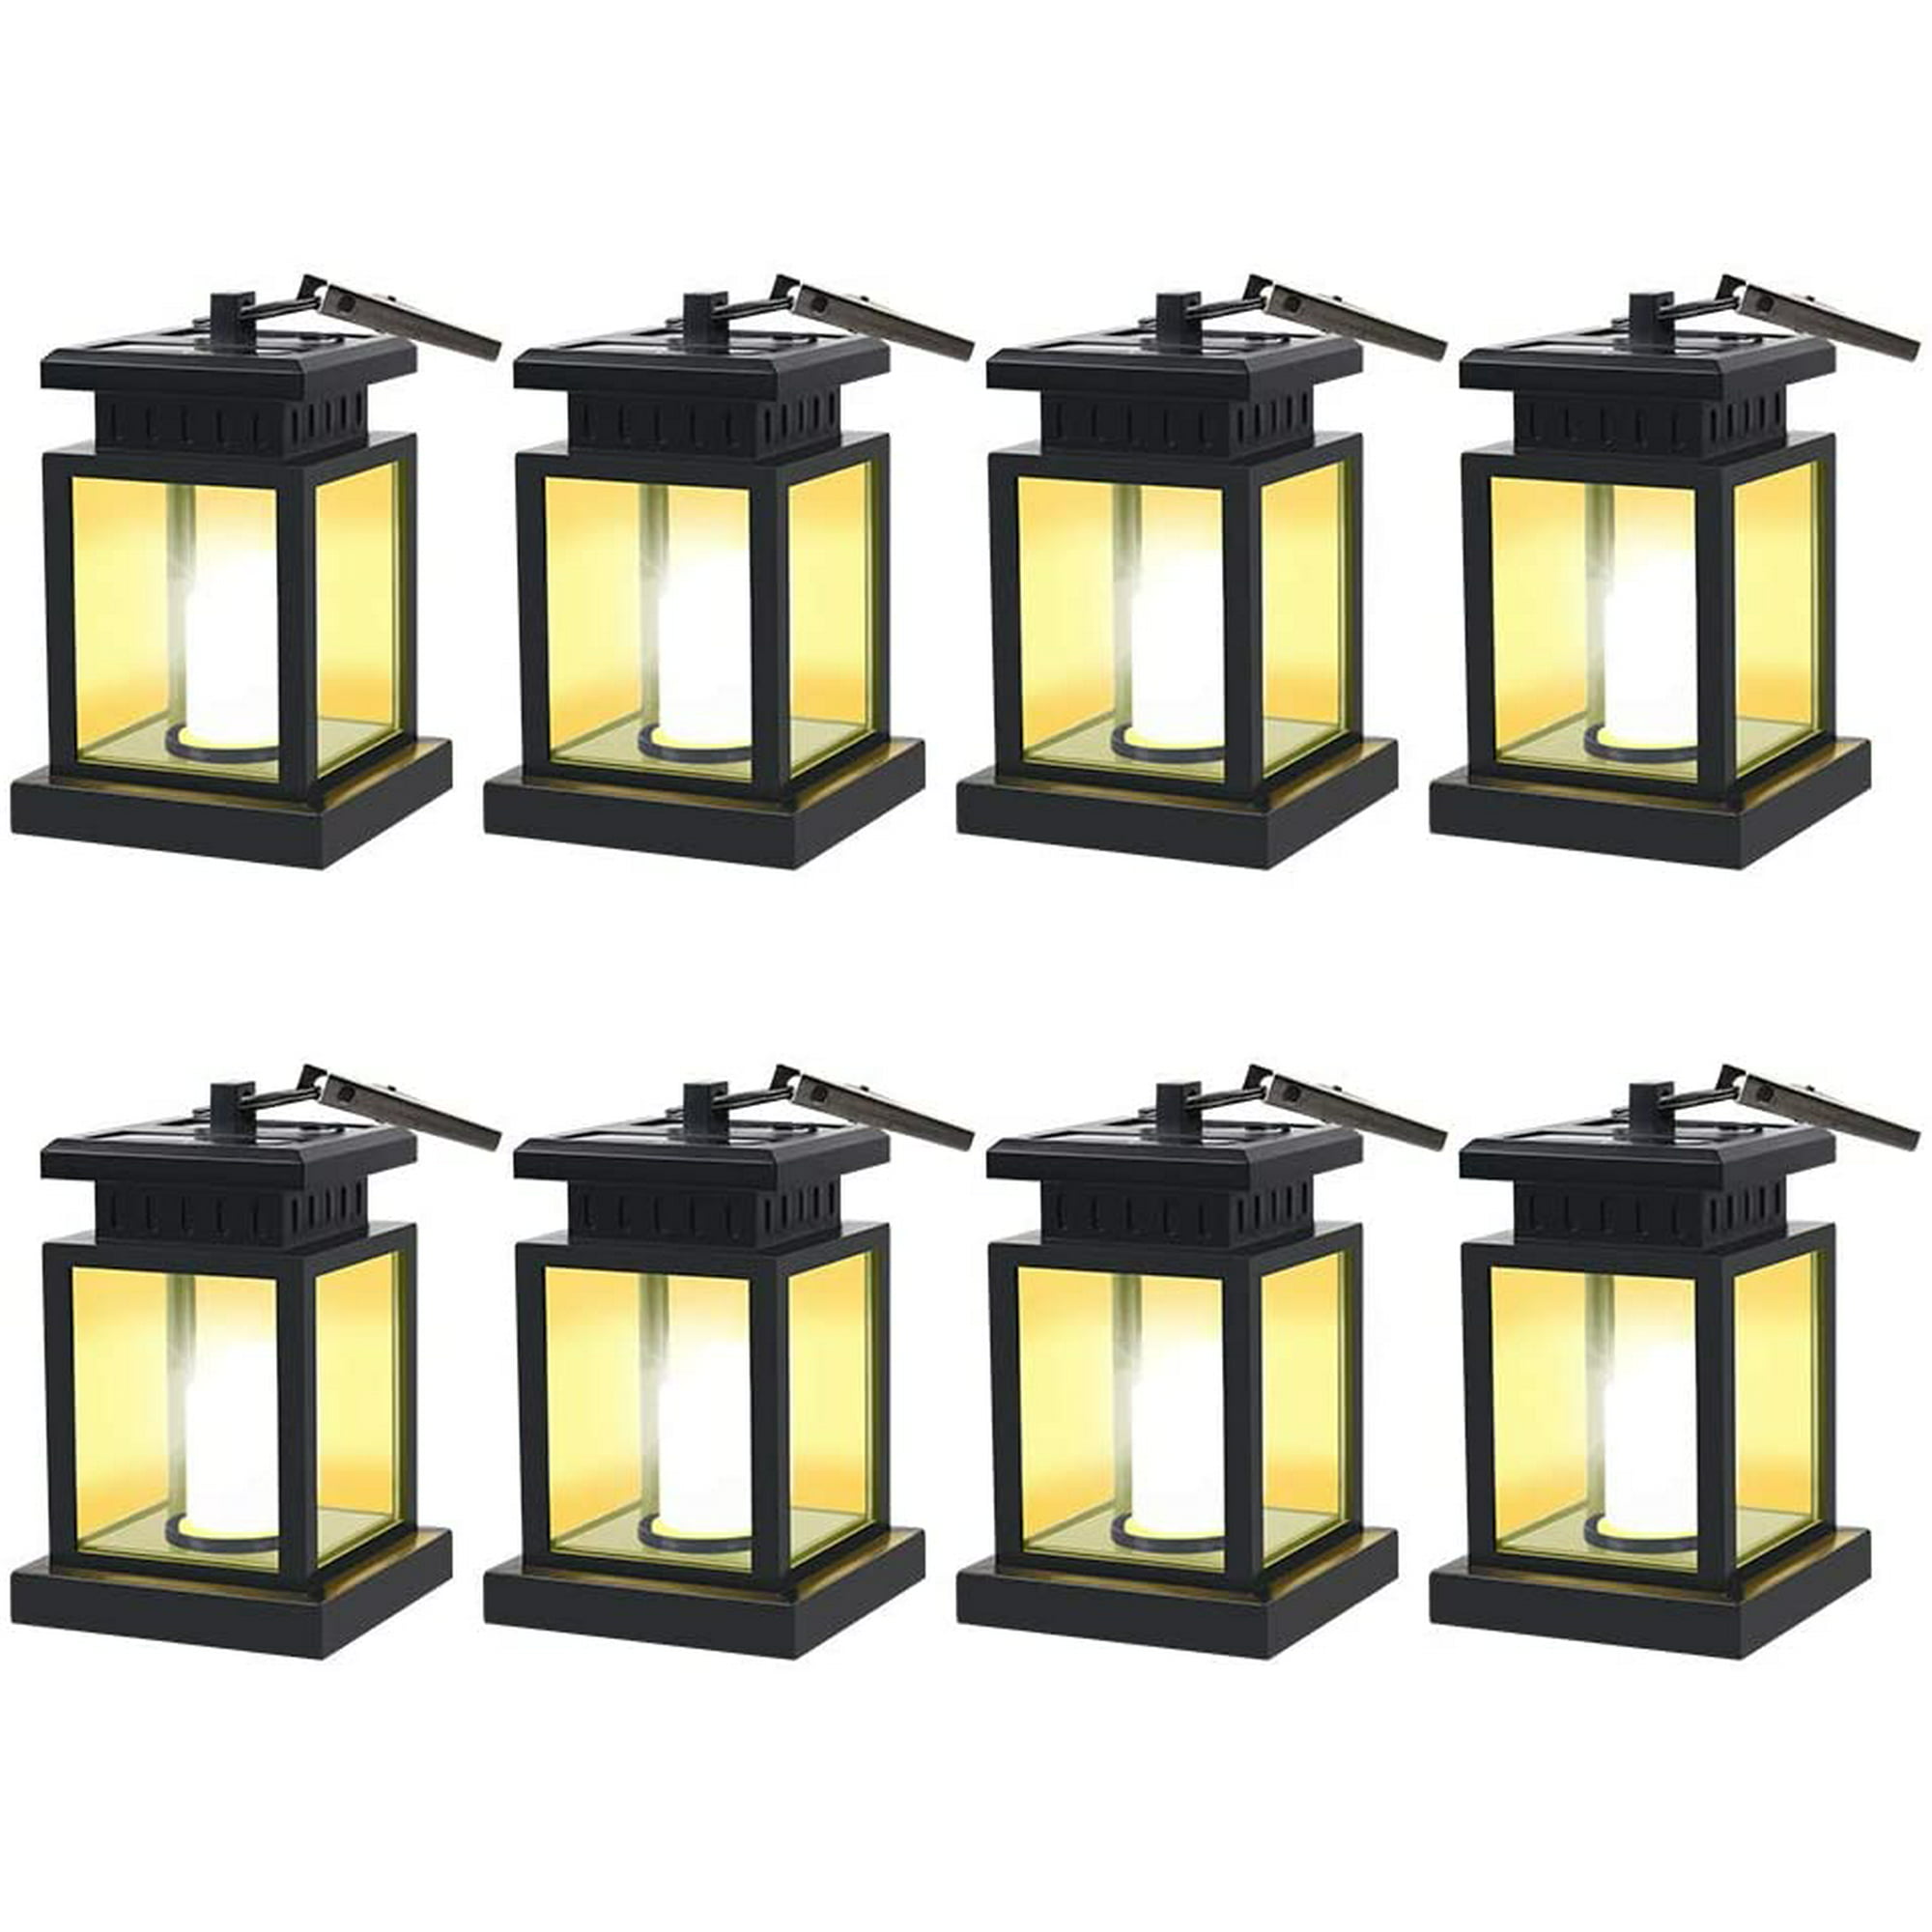 8 Pack Led Solar Powered, Solar Powered Lights For Outdoor Umbrella